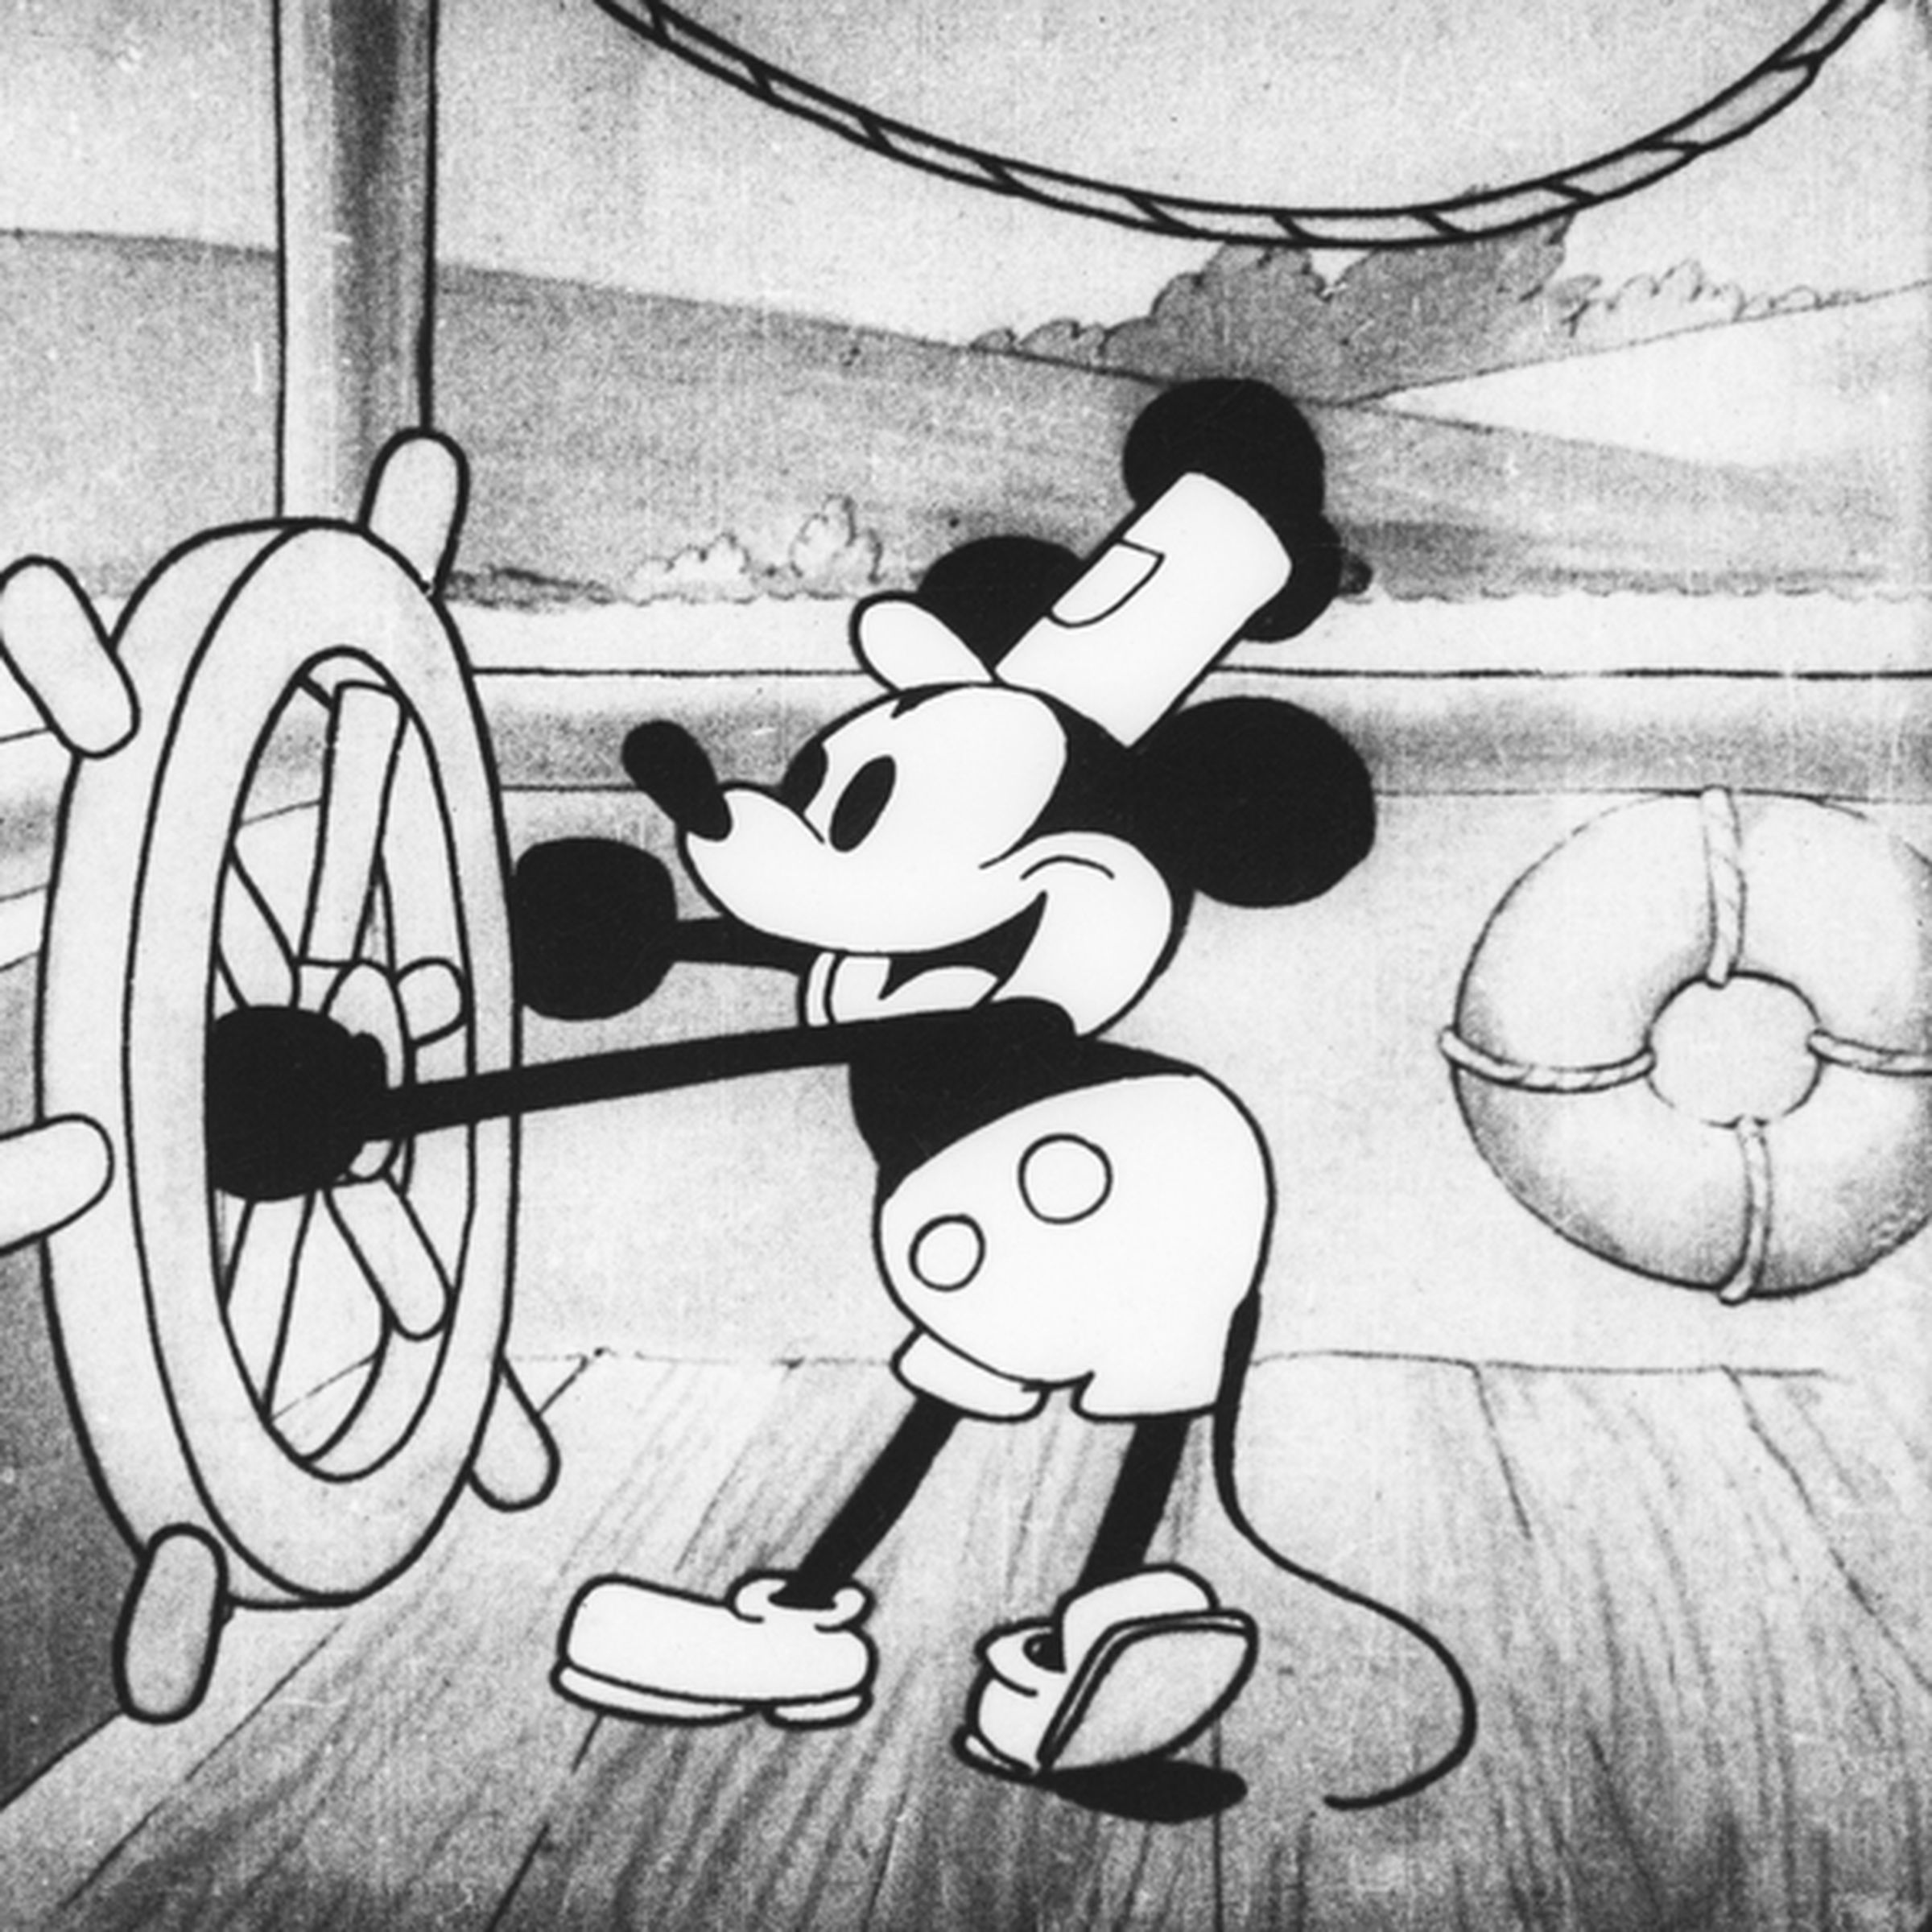 A screenshot of Mickey Mouse in Steamboat Willie from 1928.